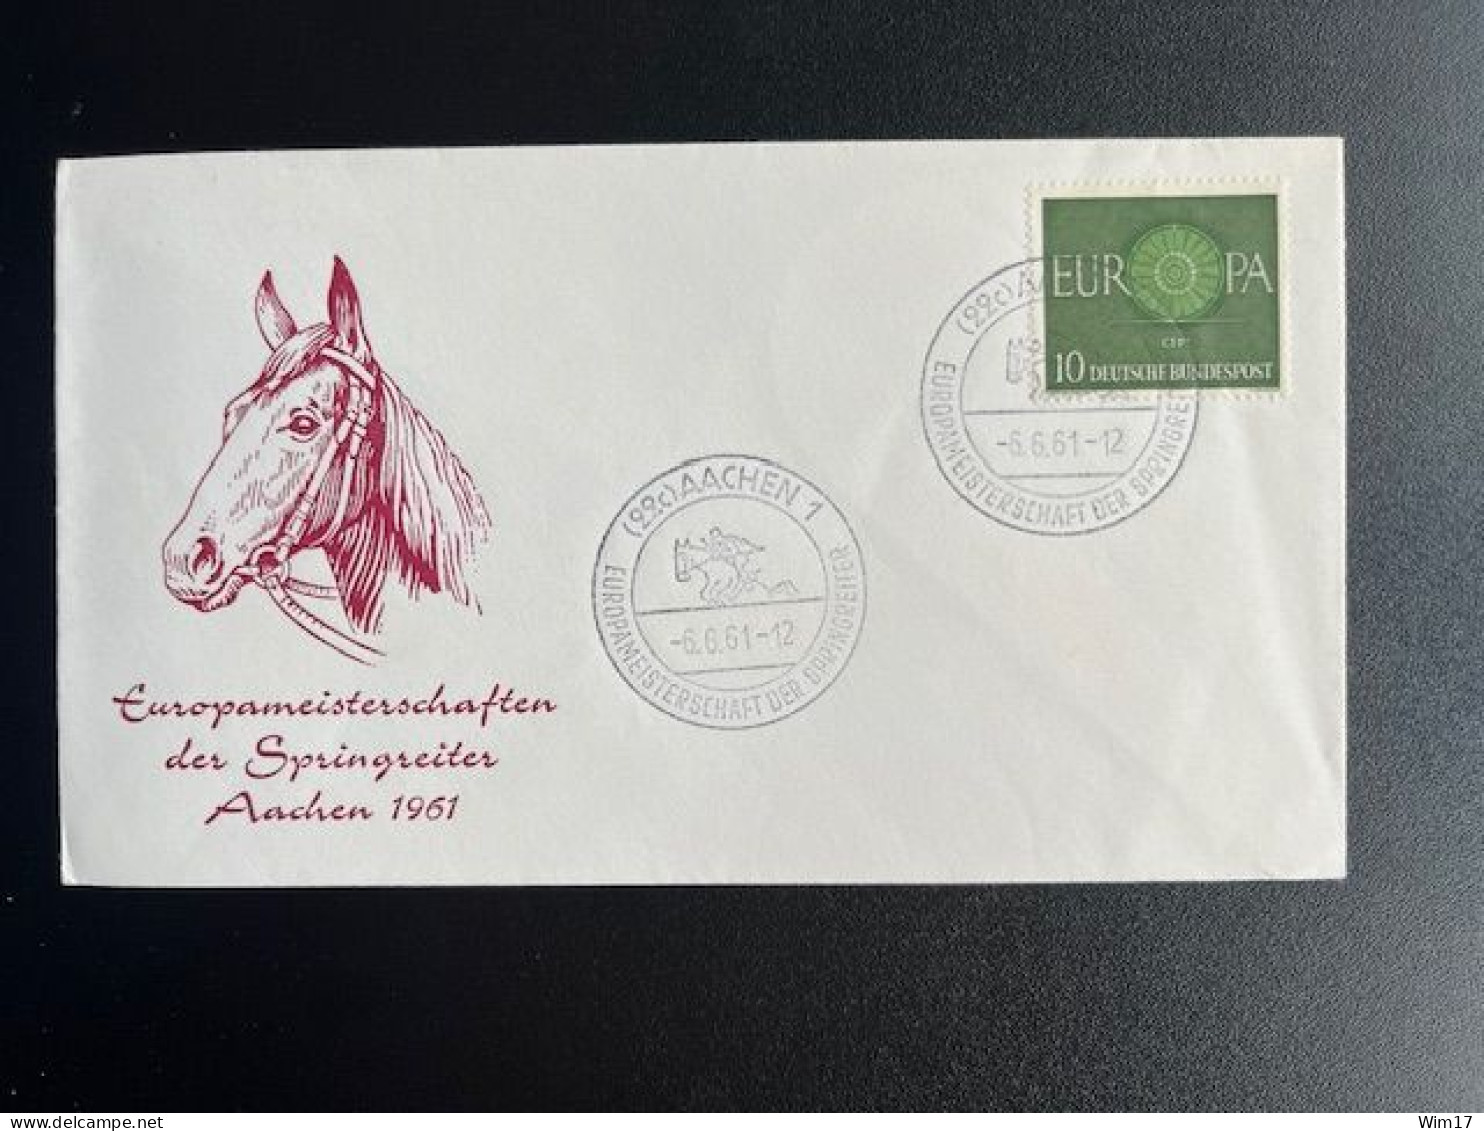 GERMANY 1961 SPECIAL COVER EUROPEAN CHAMPIONSHIP HORSE JUMPING 06-06-1961 DUITSLAND DEUTSCHLAND HORSES - Lettres & Documents